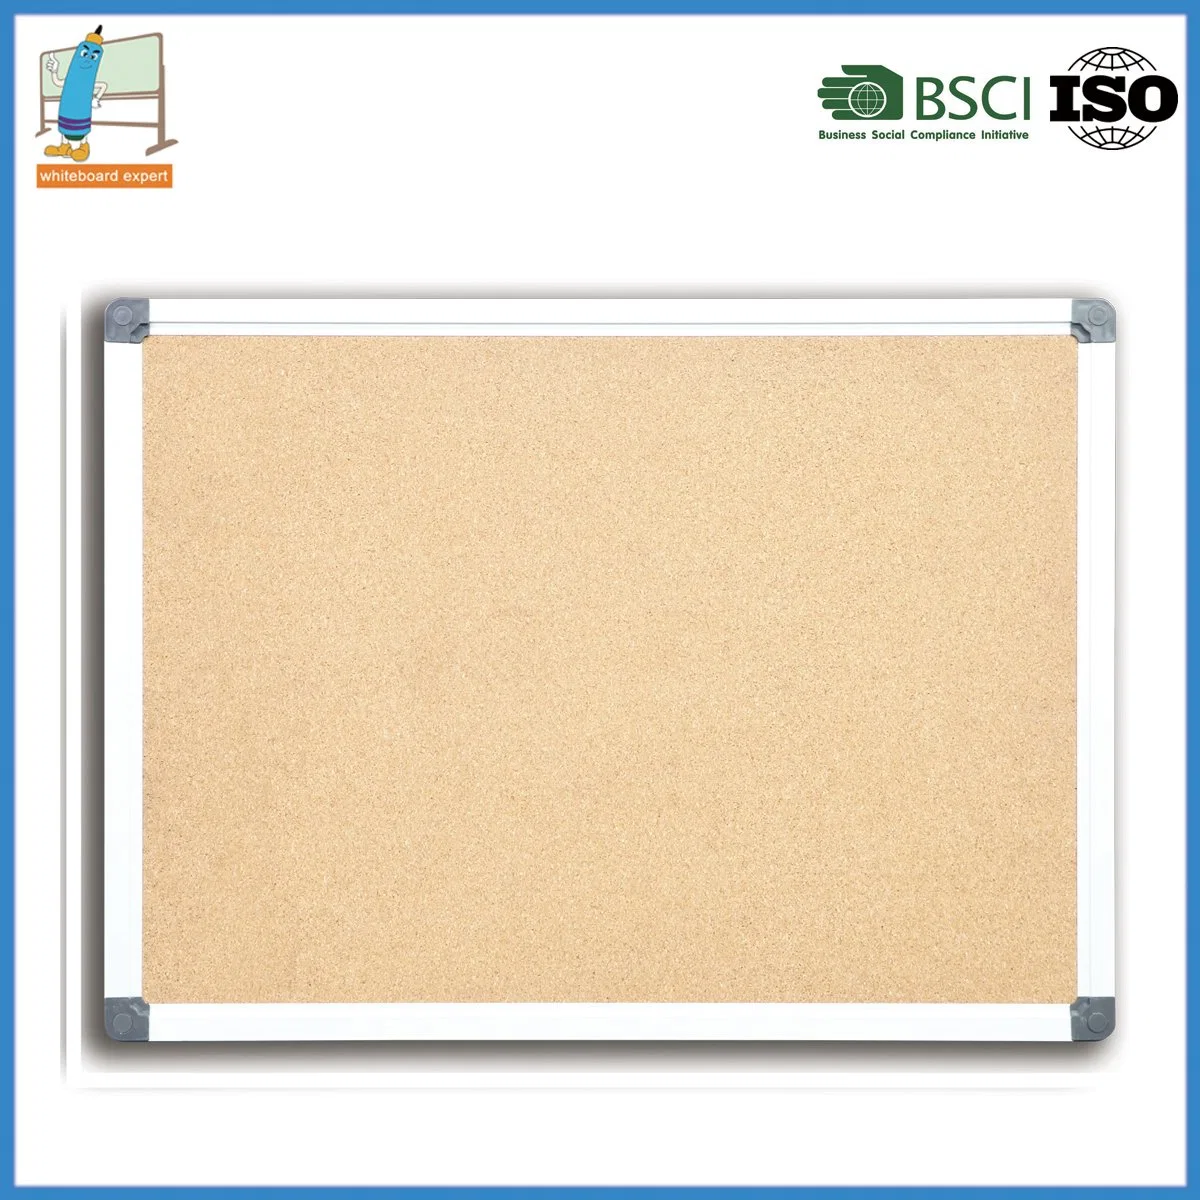 Cork Board Concealed Mounting Corners for Classroom